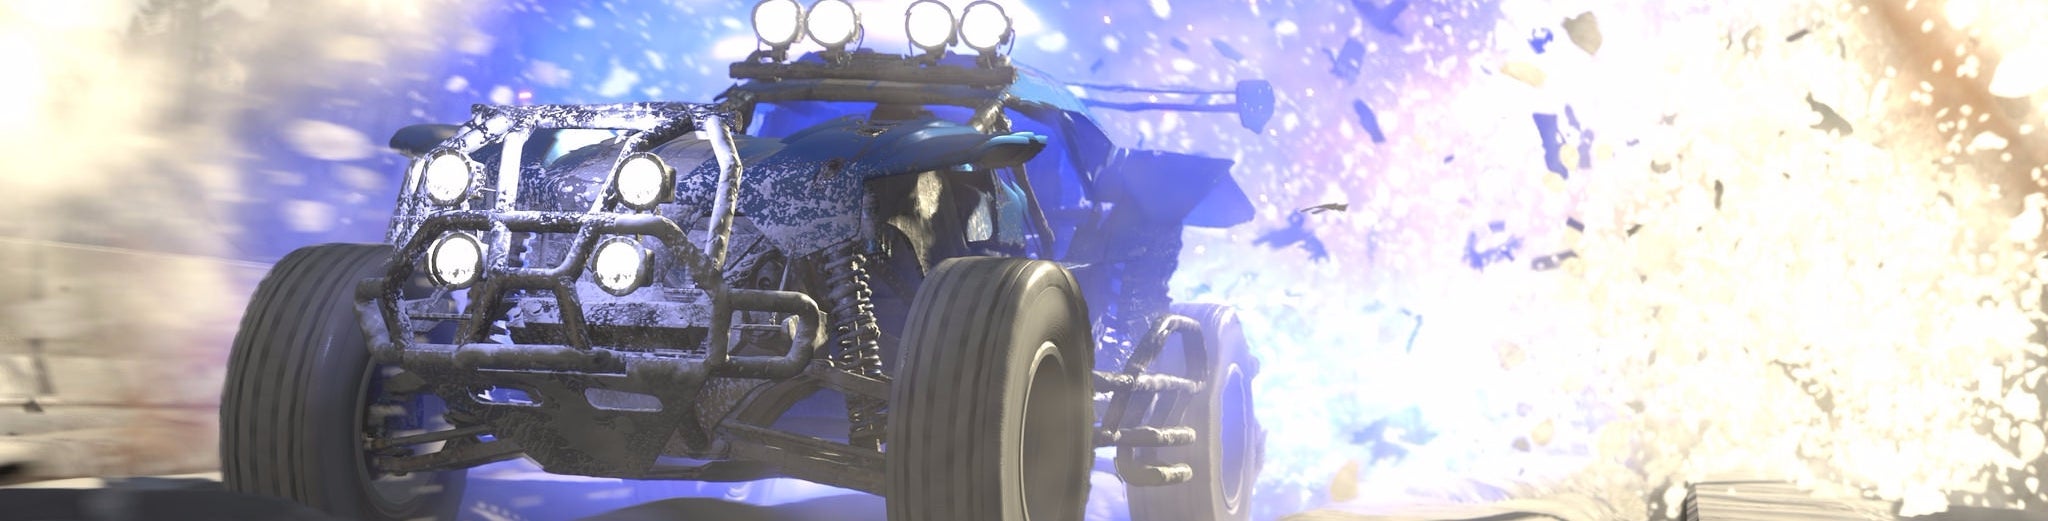 Image for How the devs behind Driveclub plan to bring the arcade racer back to life